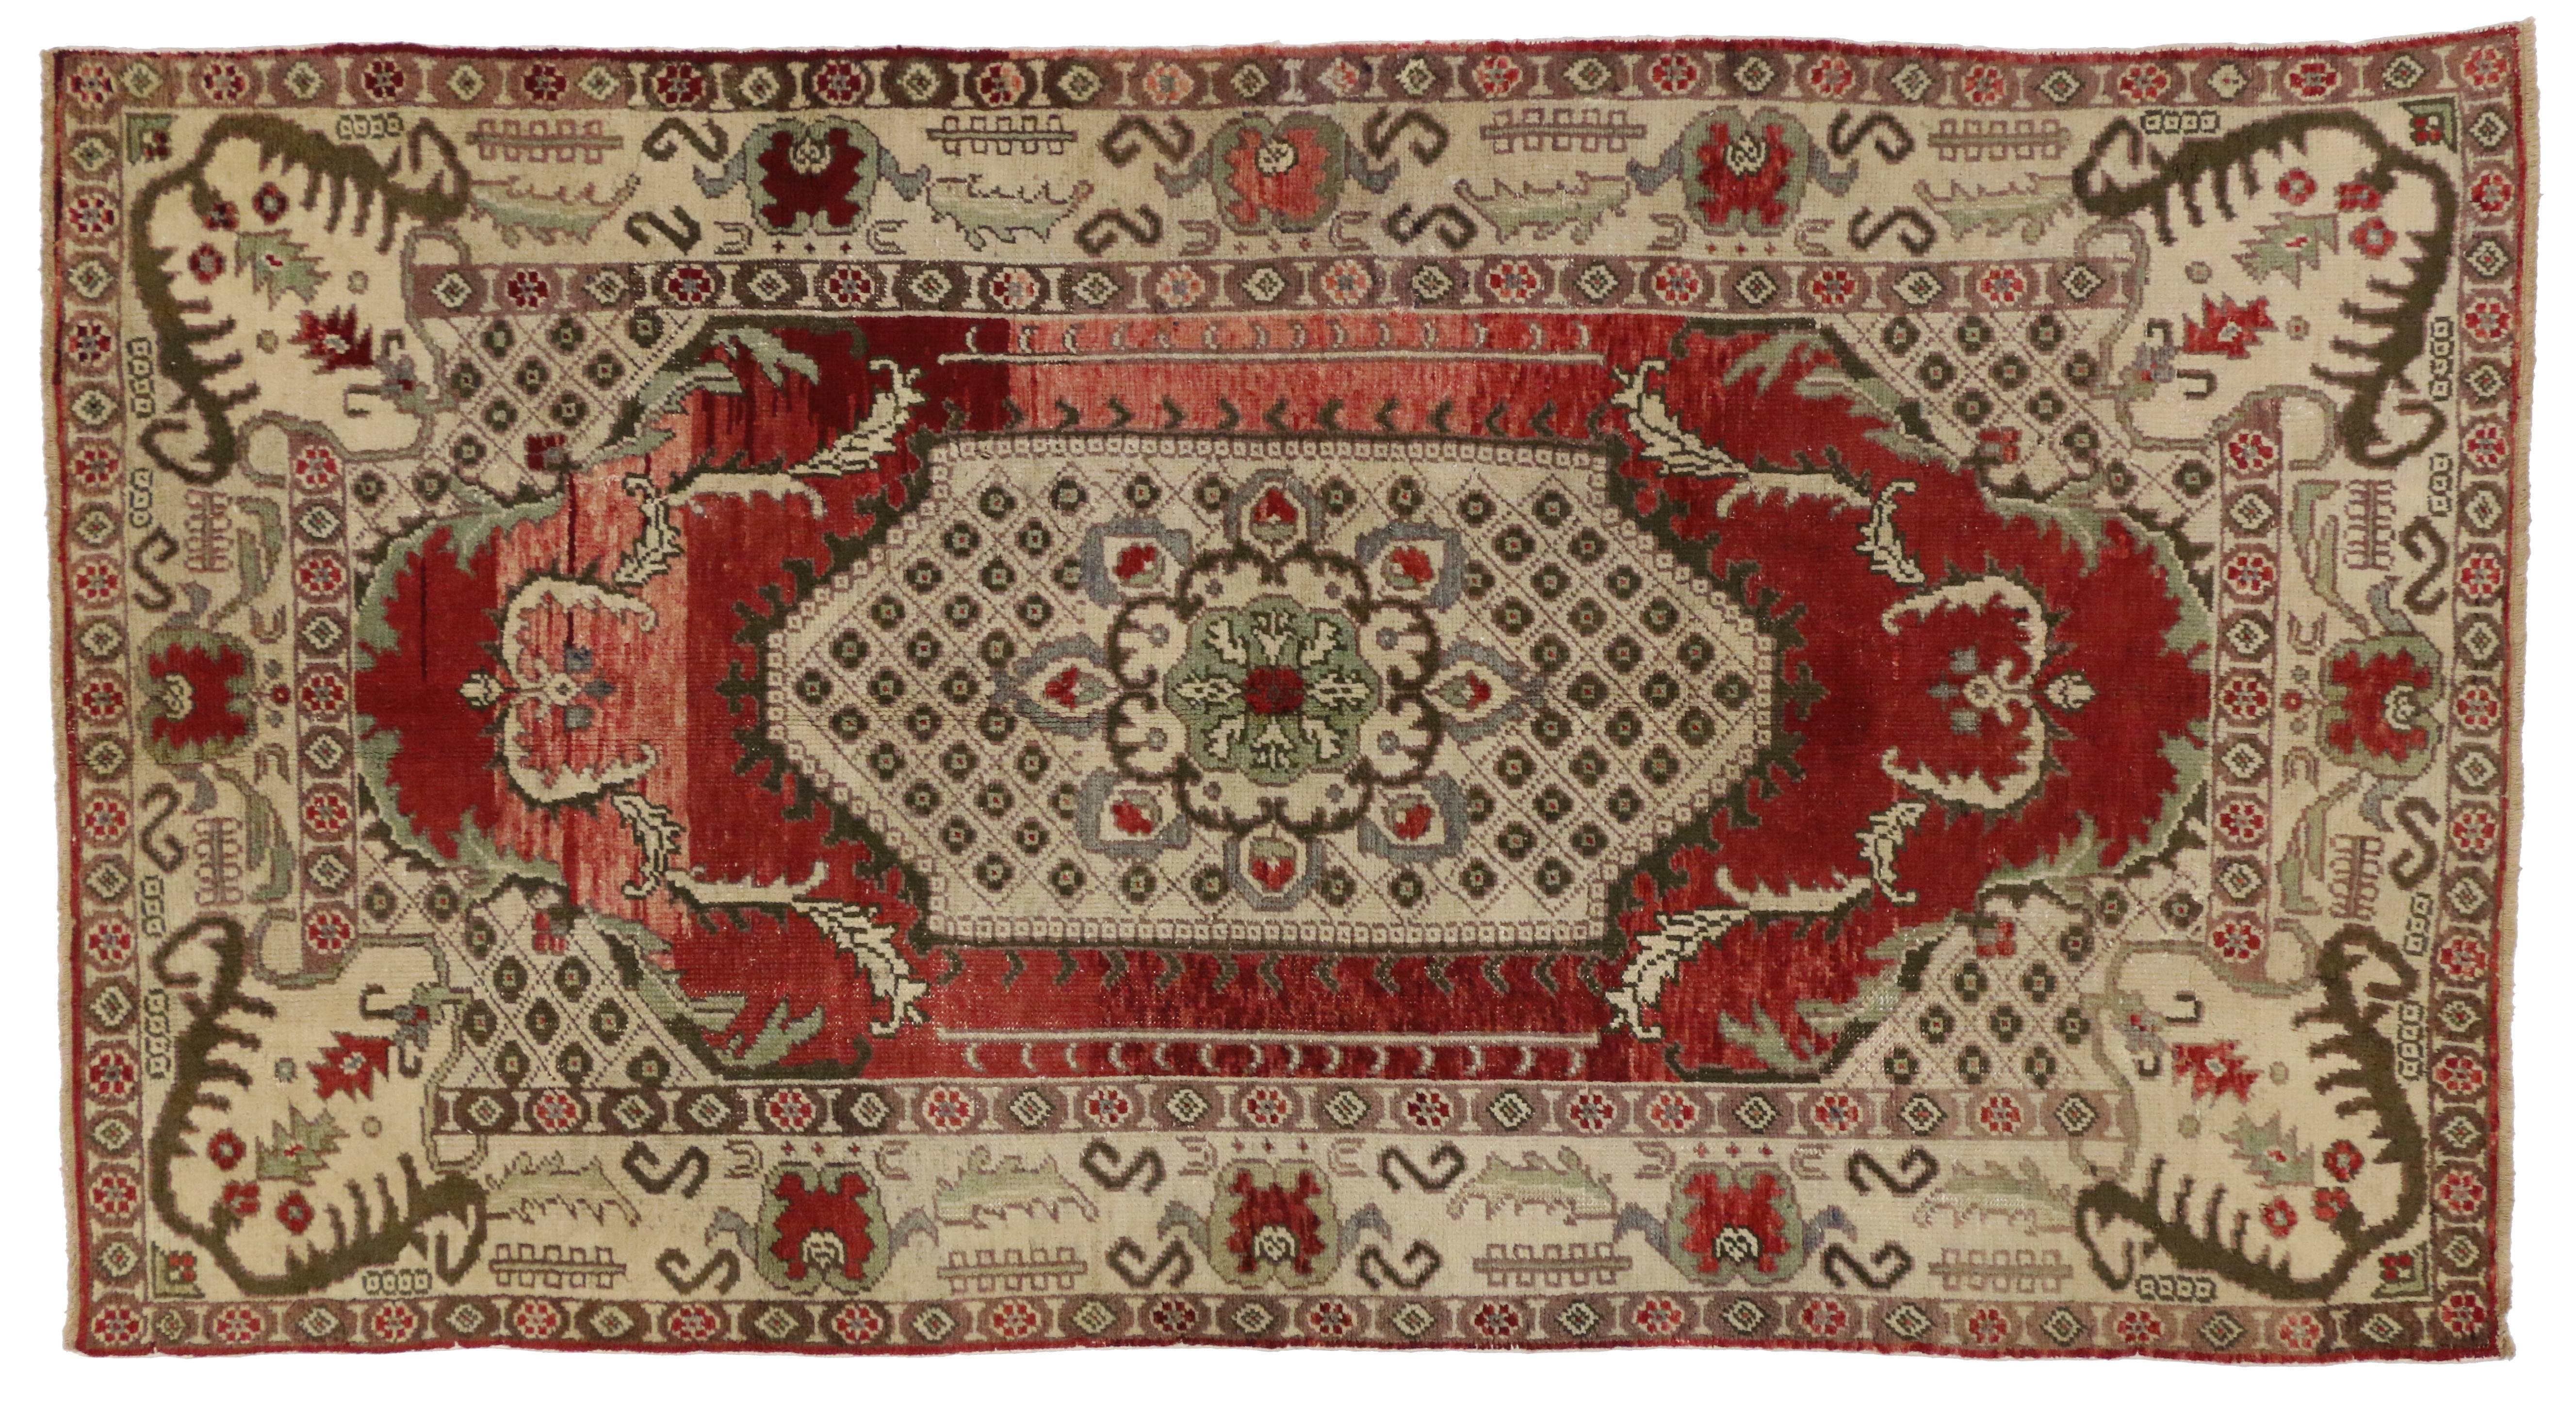 51394 vintage Turkish Oushak gallery rug with classic medallion and corner motif. This opulent Turkish Oushak rug features a rectilinear lozenge in beige on abrashed red field with an intricate center floral medallion in creamy-beige with a slate